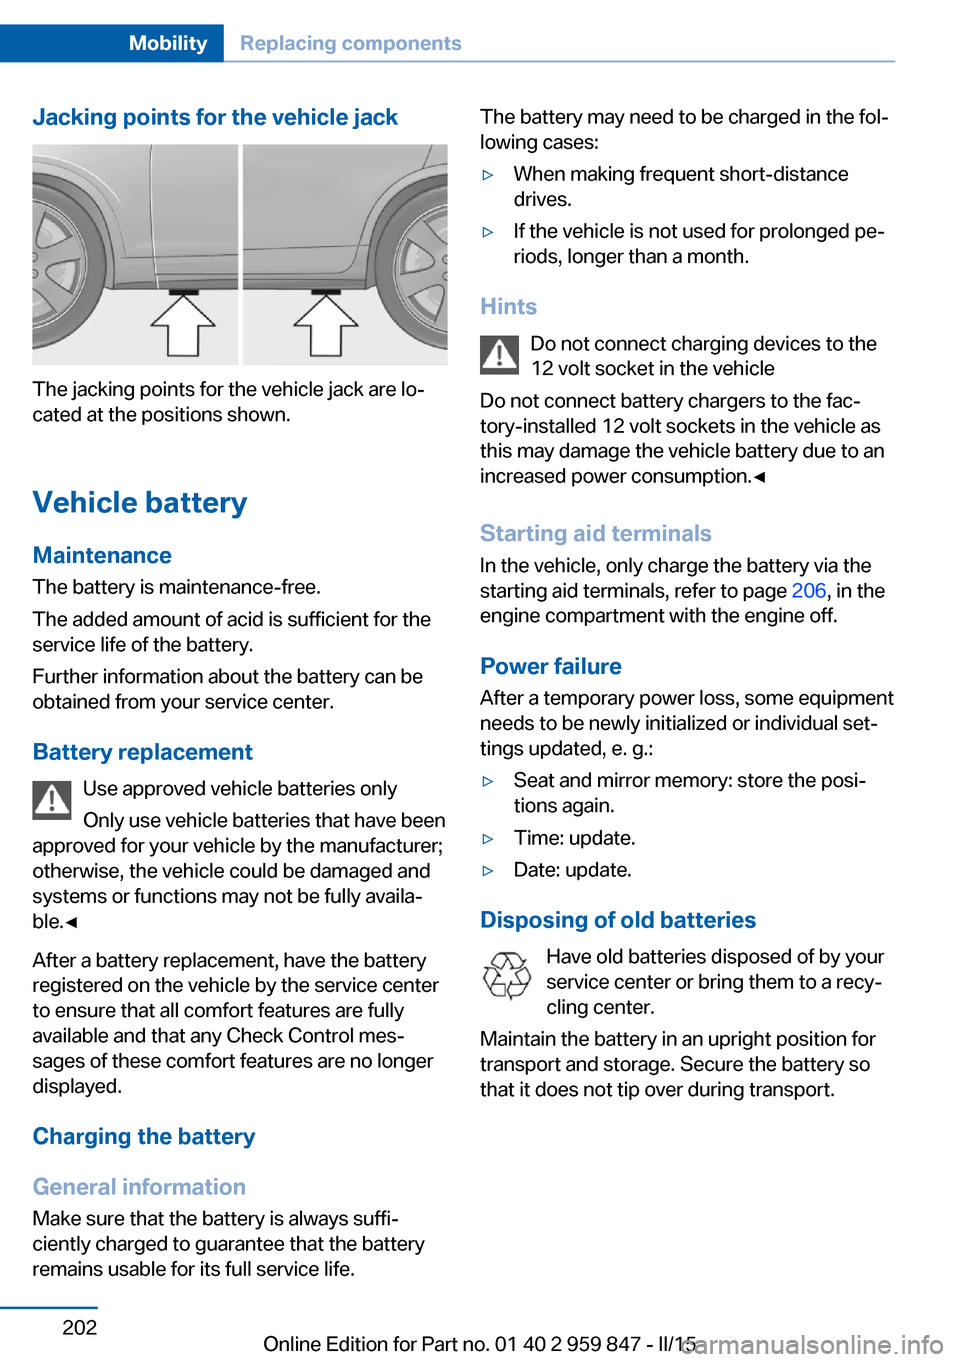 BMW 2 SERIES CONVERTIBLE 2015 F23 User Guide Jacking points for the vehicle jack
The jacking points for the vehicle jack are lo‐
cated at the positions shown.
Vehicle battery Maintenance
The battery is maintenance-free.
The added amount of aci